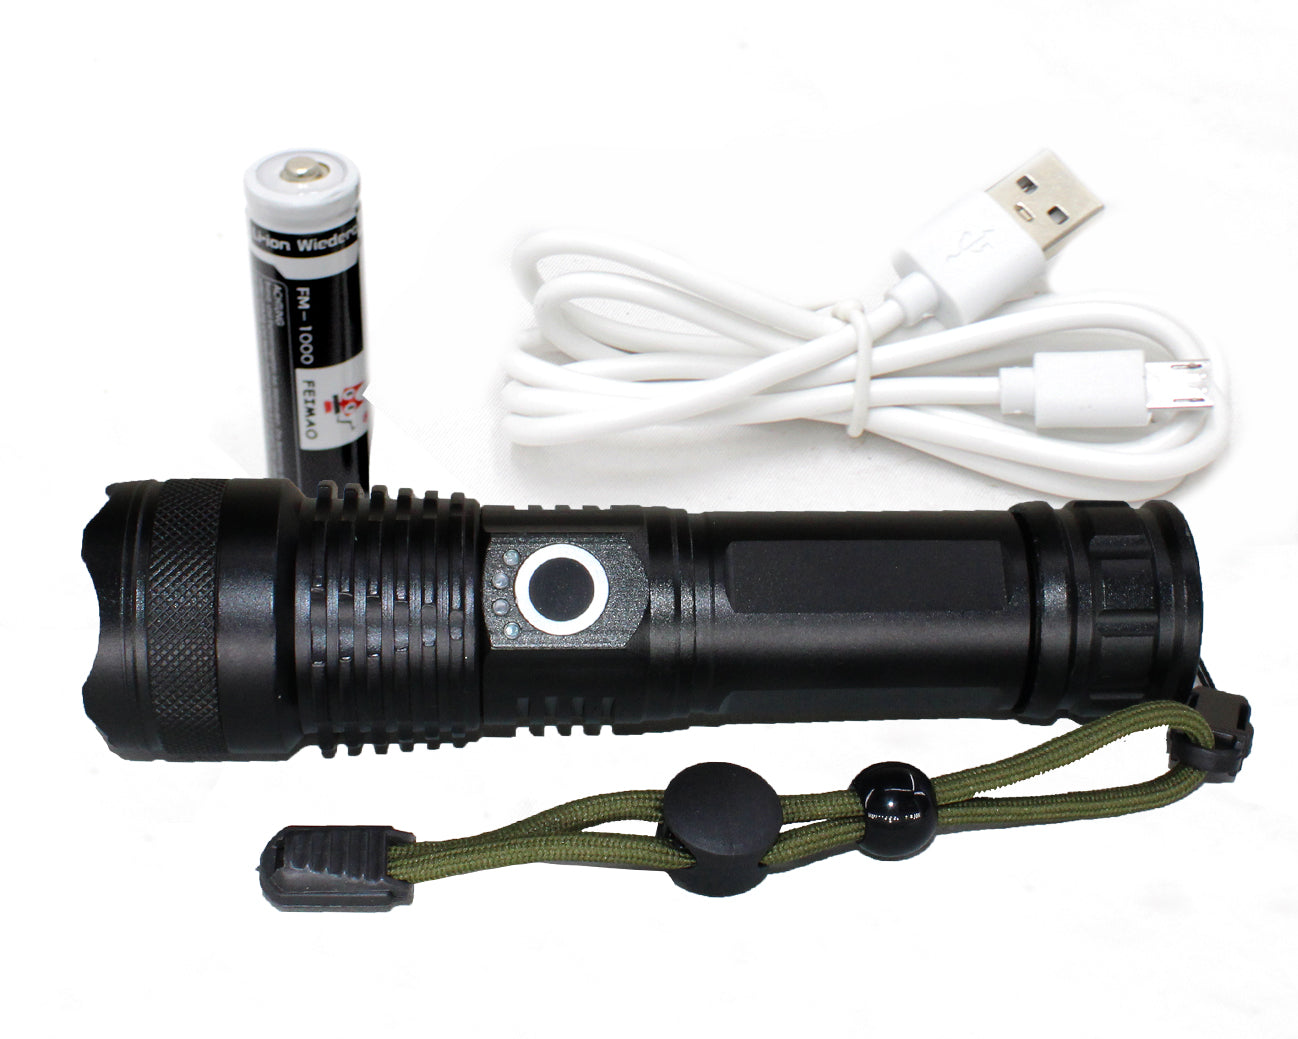 LMA - LED High Lumen Rechargeable Flashlight with Strap - Black